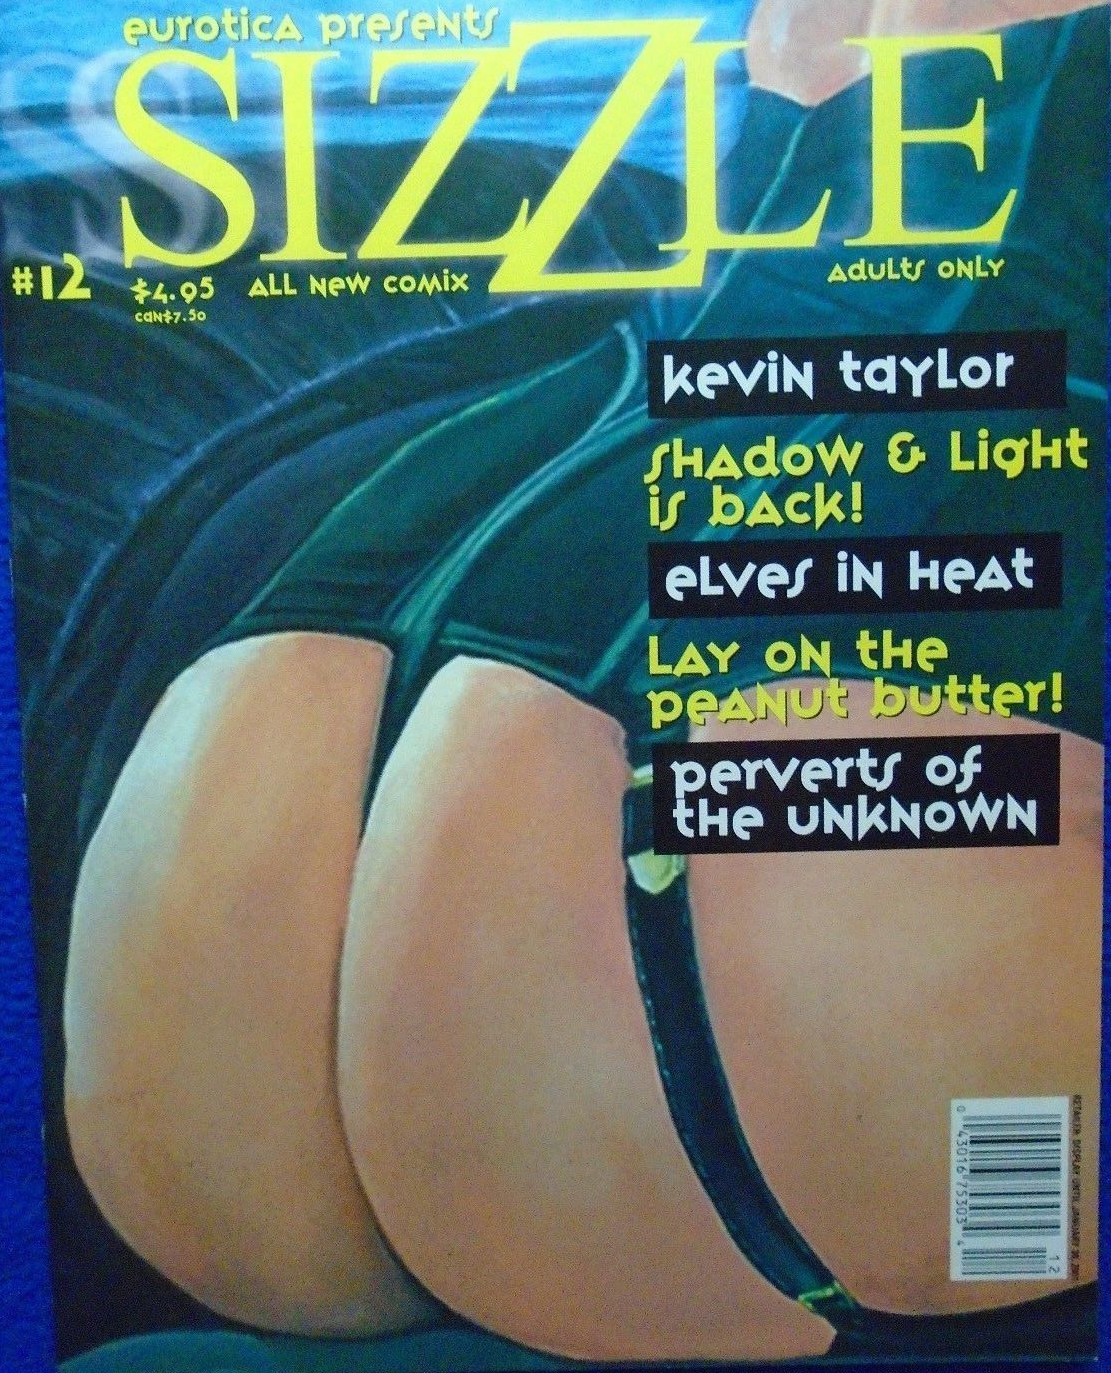 Sizzle by Eurotica # 12 magazine back issue Sizzle by Eurotica magizine back copy 